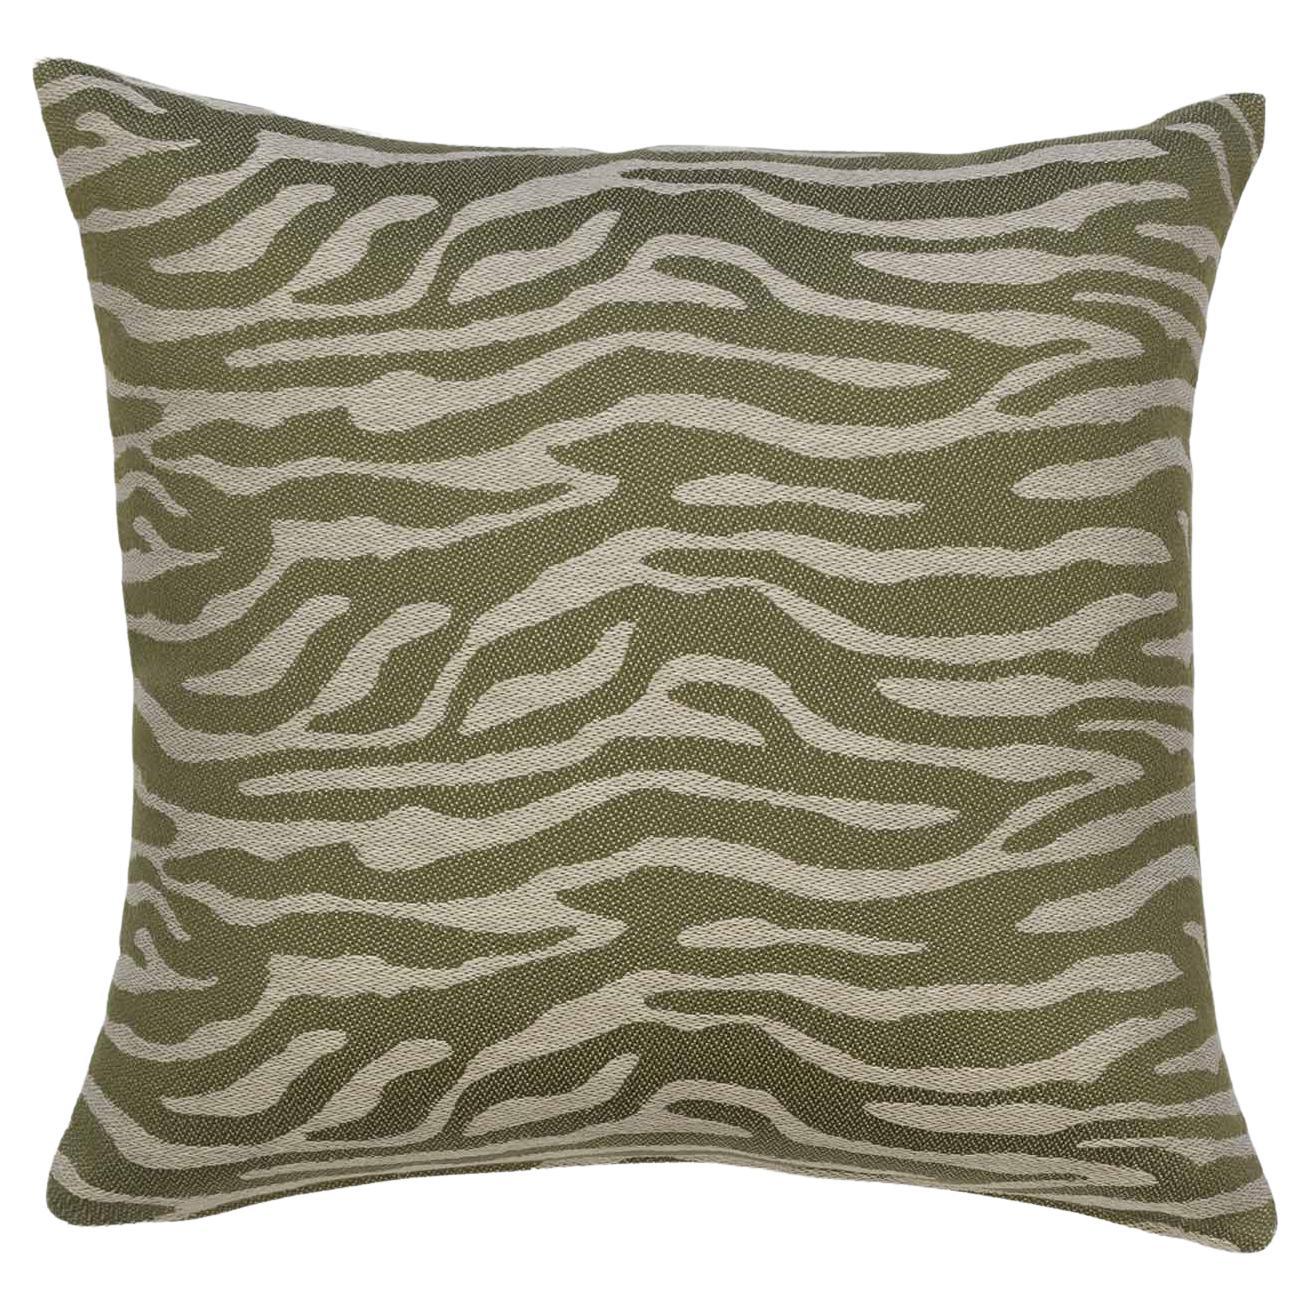 Modern Textured Patterned Throw Pillow Green "Cayenne" by Evolution 21